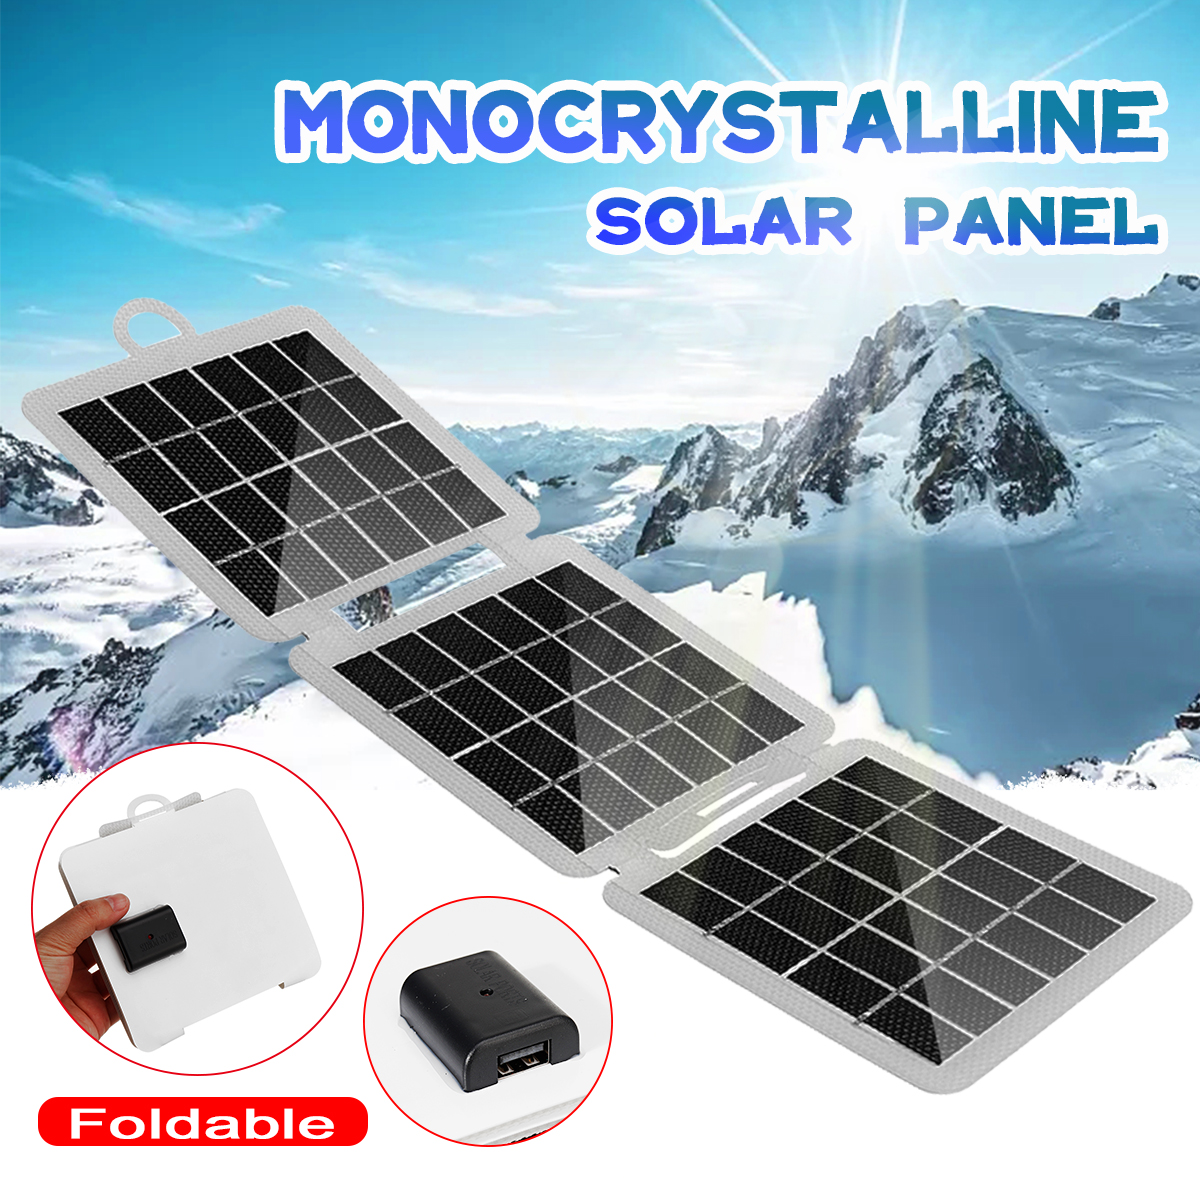 7W-Foldable-Solar-Panel-USB-Output-Port-Portable-Monocrystalline-Charging-Panel-Outdoor-Camping-Emer-1900305-1